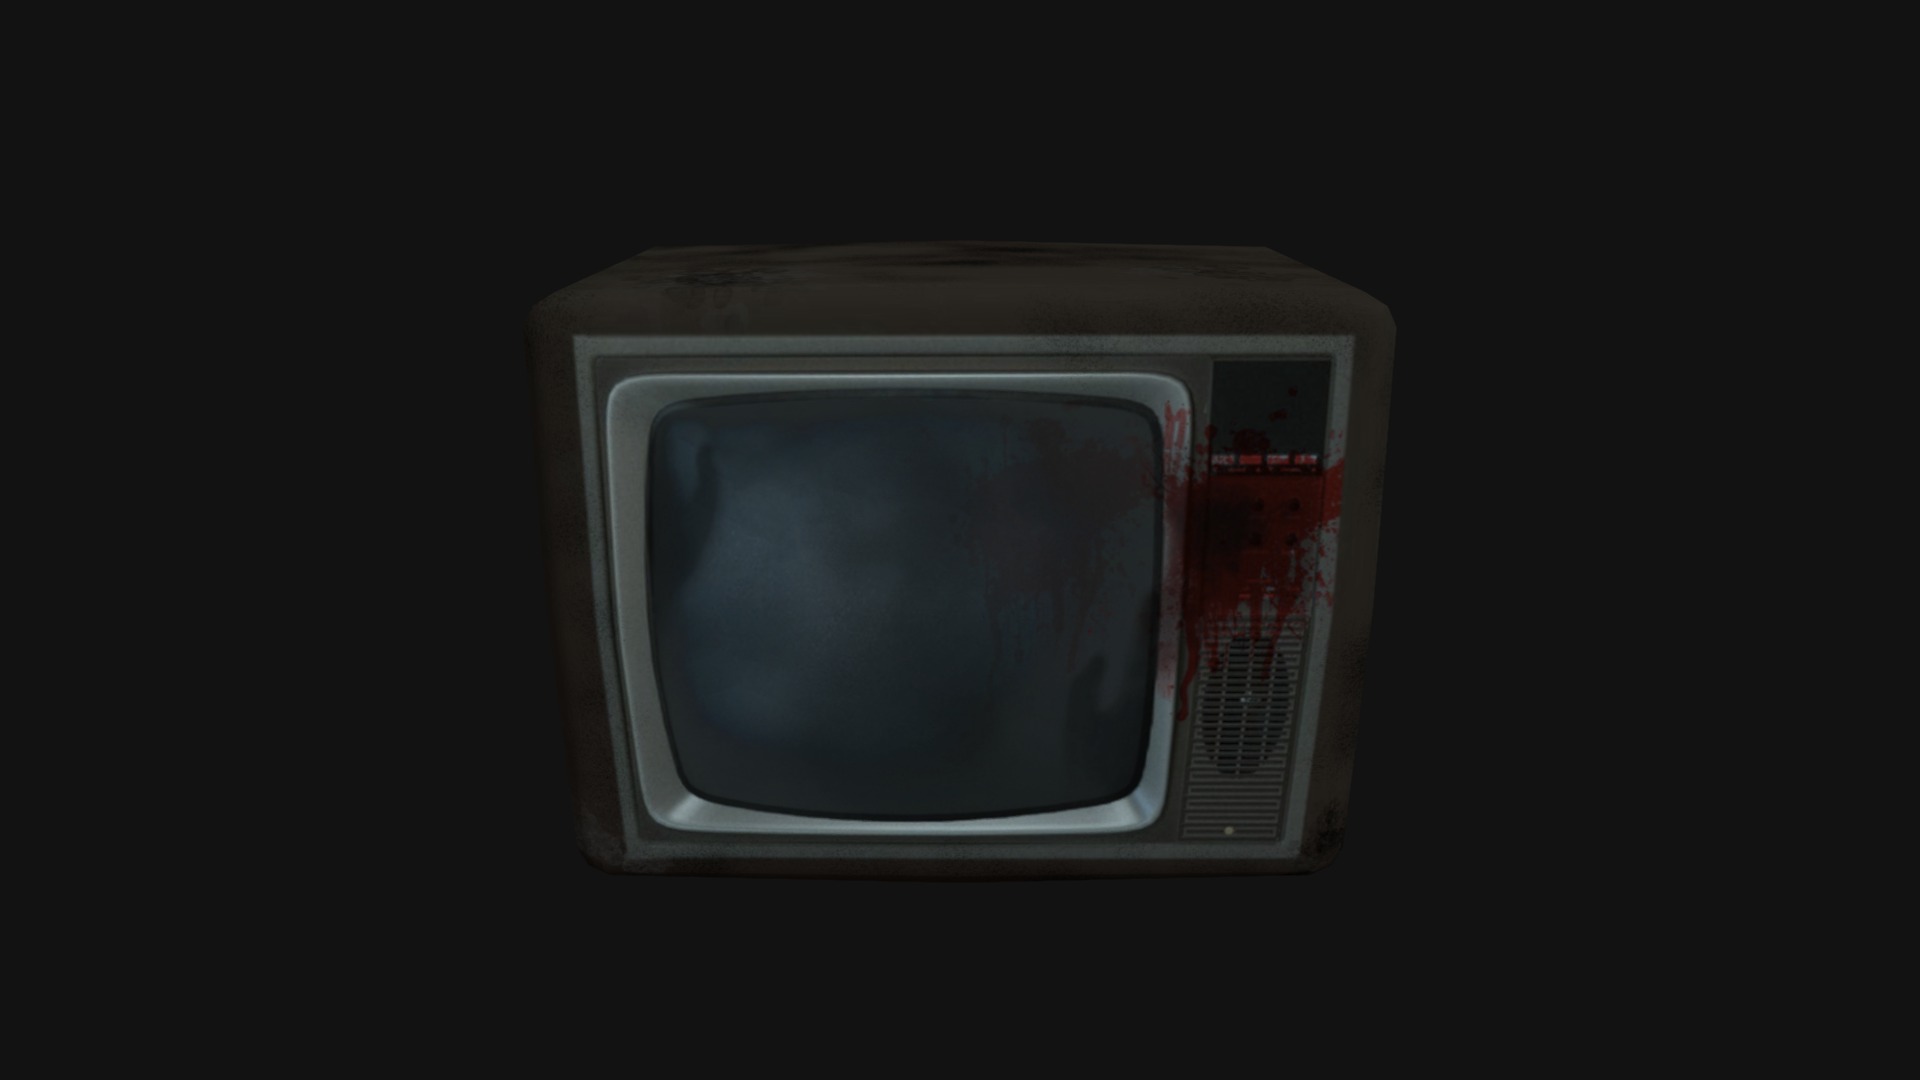 3D model Old TV for Horror Games - This is a 3D model of the Old TV for Horror Games. The 3D model is about a white rectangular object with a screen.